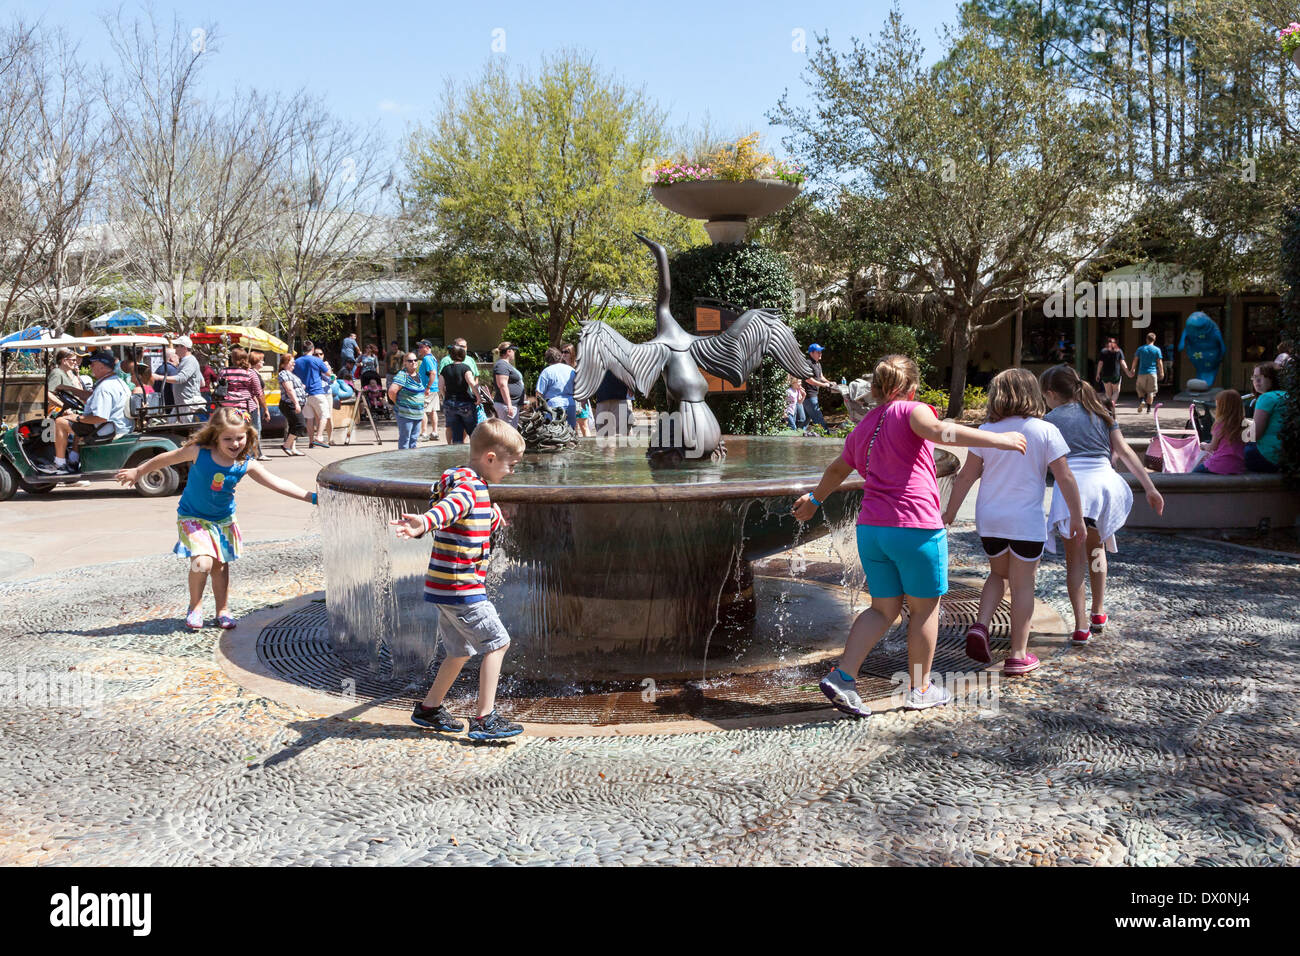 Children playing around a fountain in the Jacksonville, Florida zoo. Stock Photo